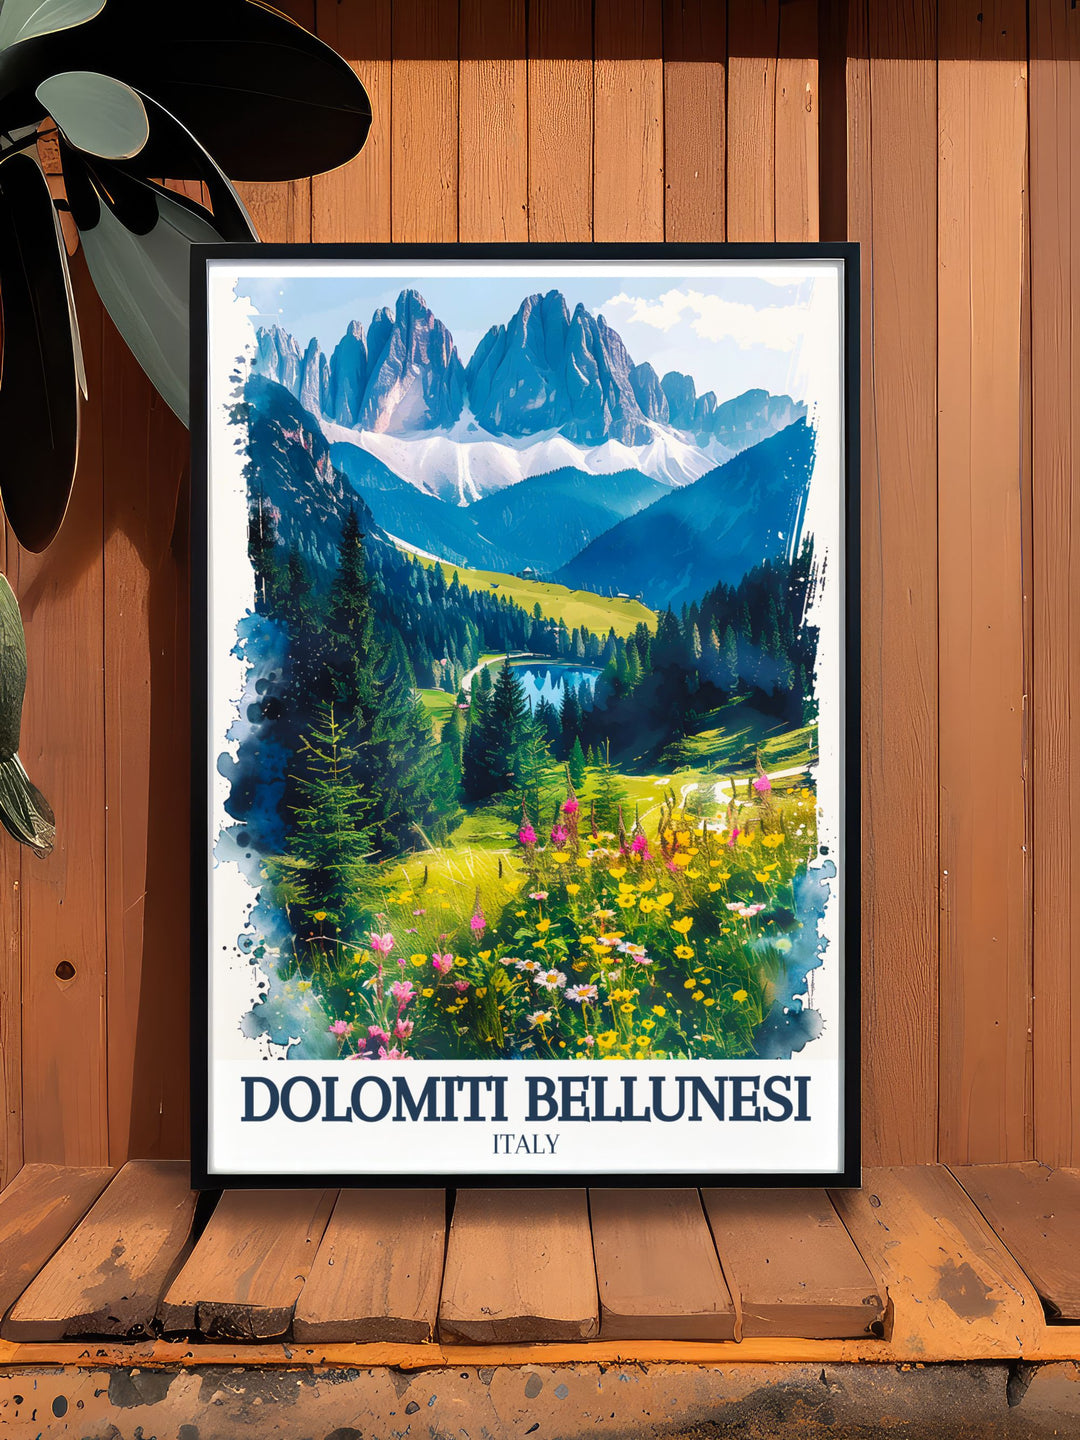 National Park art from the Dolomite range offering a captivating glimpse into the natural wonders of Northern Italy ideal for enhancing your art collection.